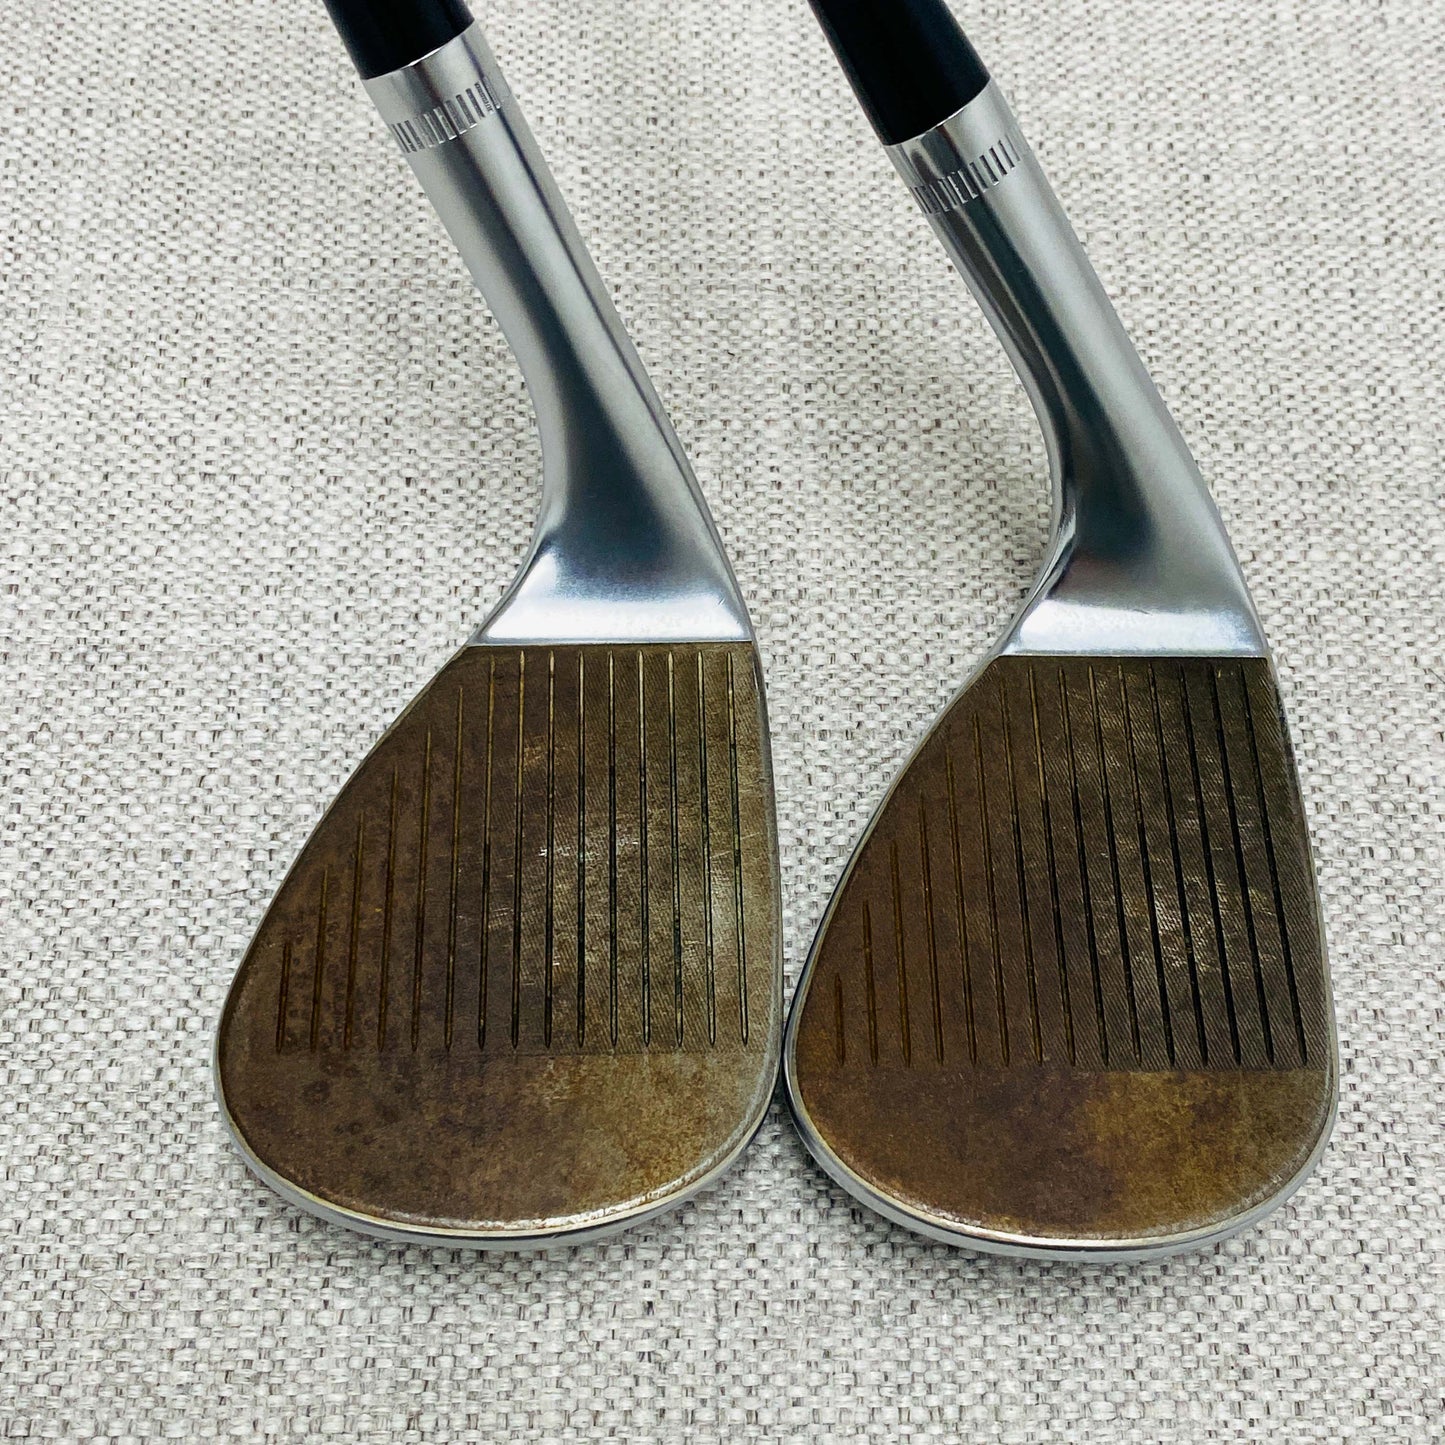 Callaway JAWS Raw-Face Wedge Set (54.10S, 60.10S) Dynamic Gold Spinner 115 Steel - Excellent Condition # 14089